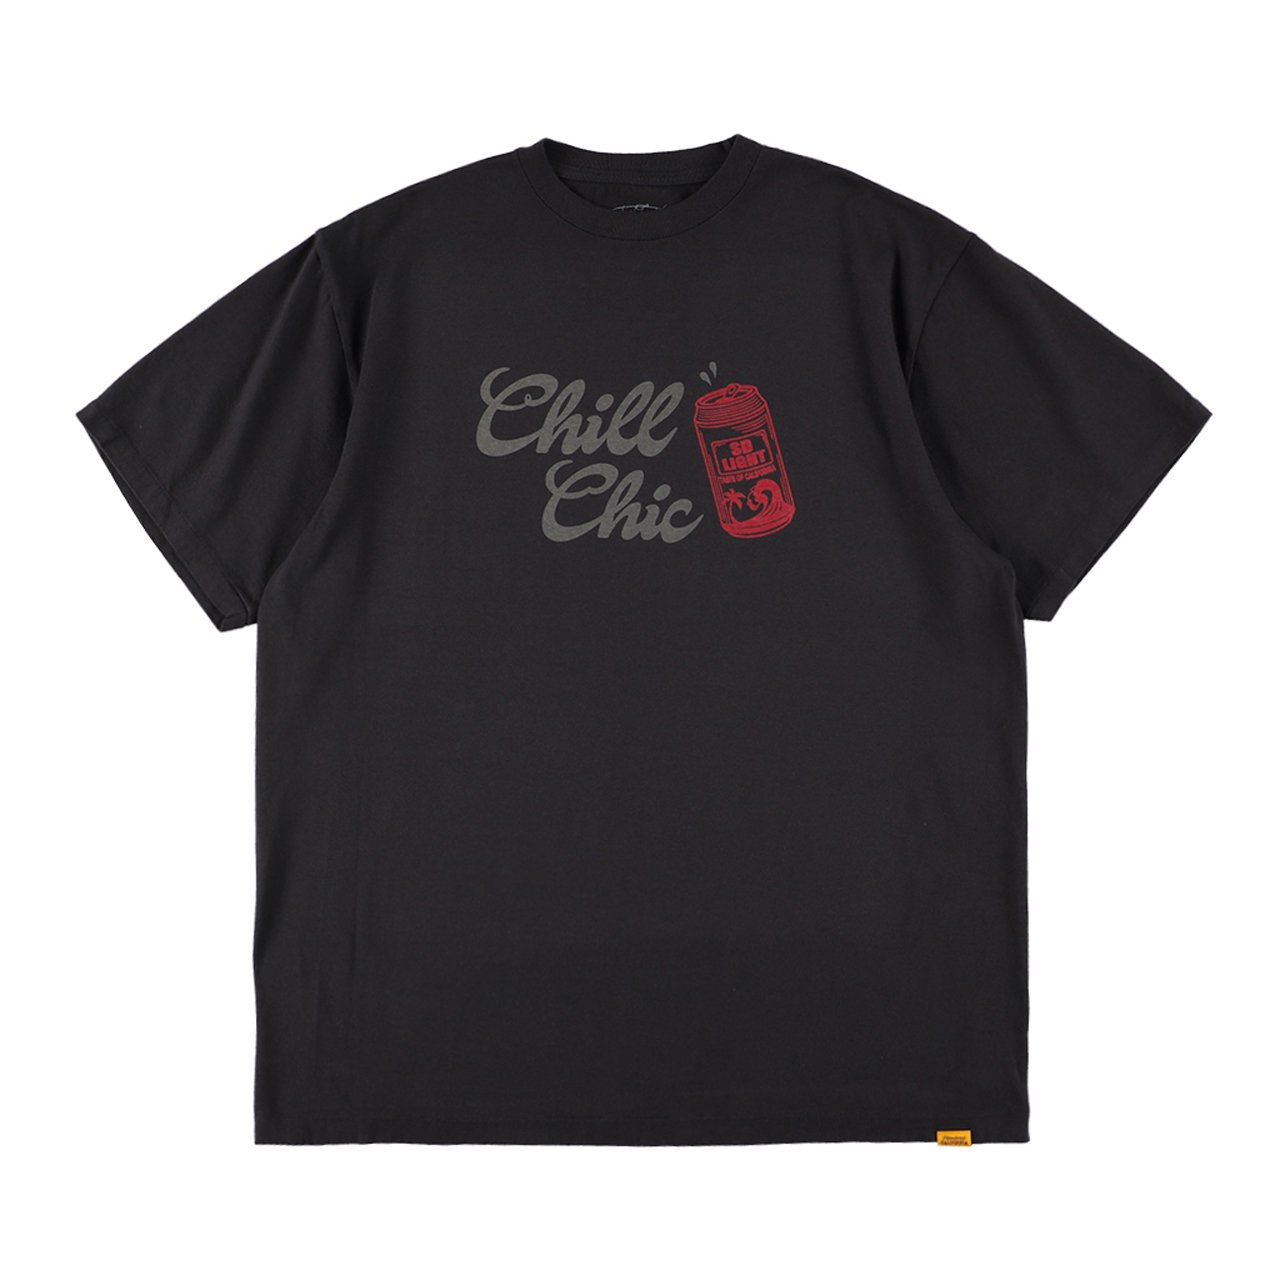 <img class='new_mark_img1' src='https://img.shop-pro.jp/img/new/icons5.gif' style='border:none;display:inline;margin:0px;padding:0px;width:auto;' />STANDARD CALIFORNIA ( ե˥)Chill Chic Tee Black